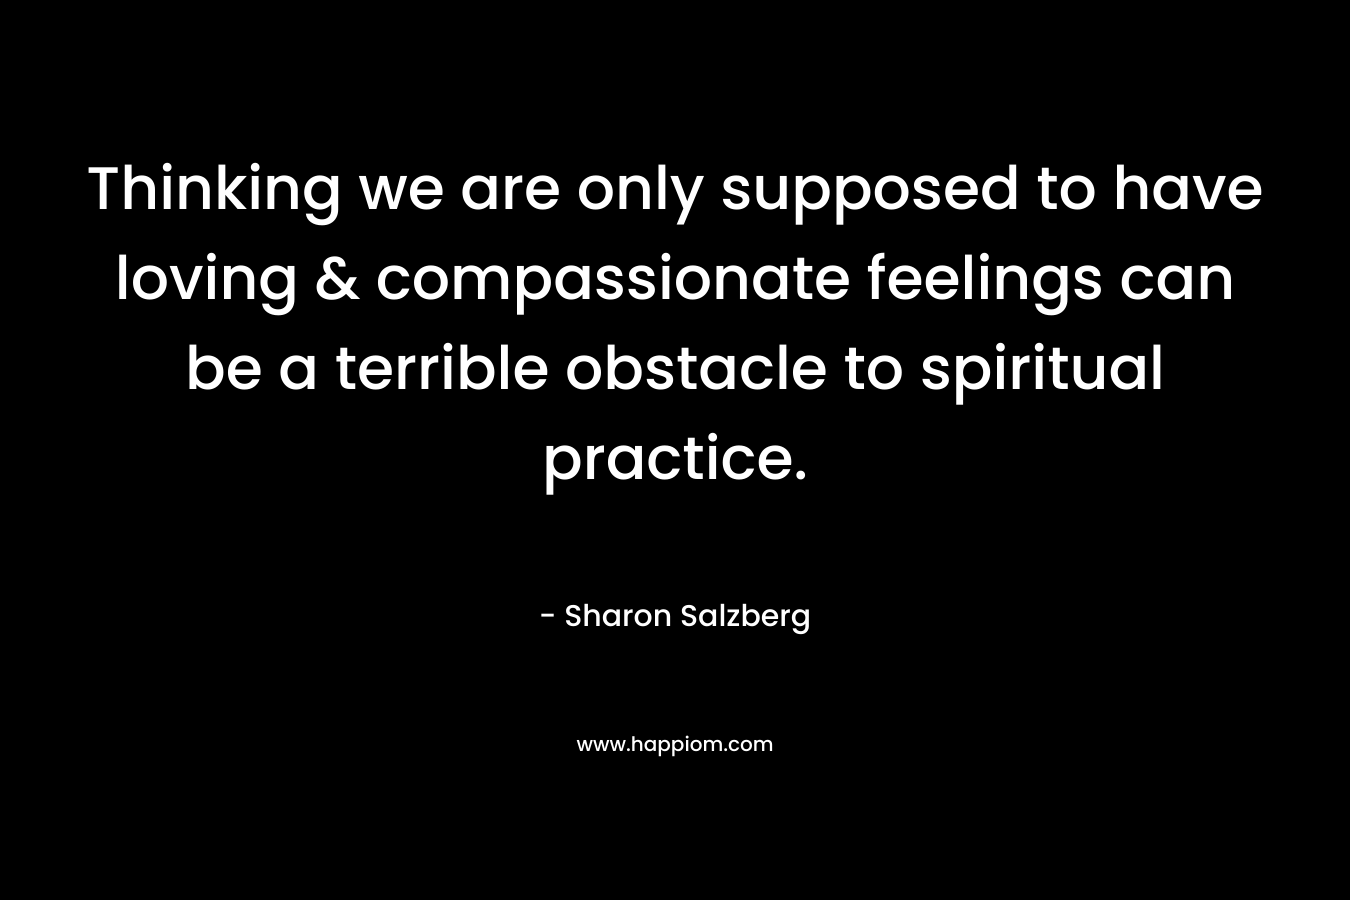 Thinking we are only supposed to have loving & compassionate feelings can be a terrible obstacle to spiritual practice.